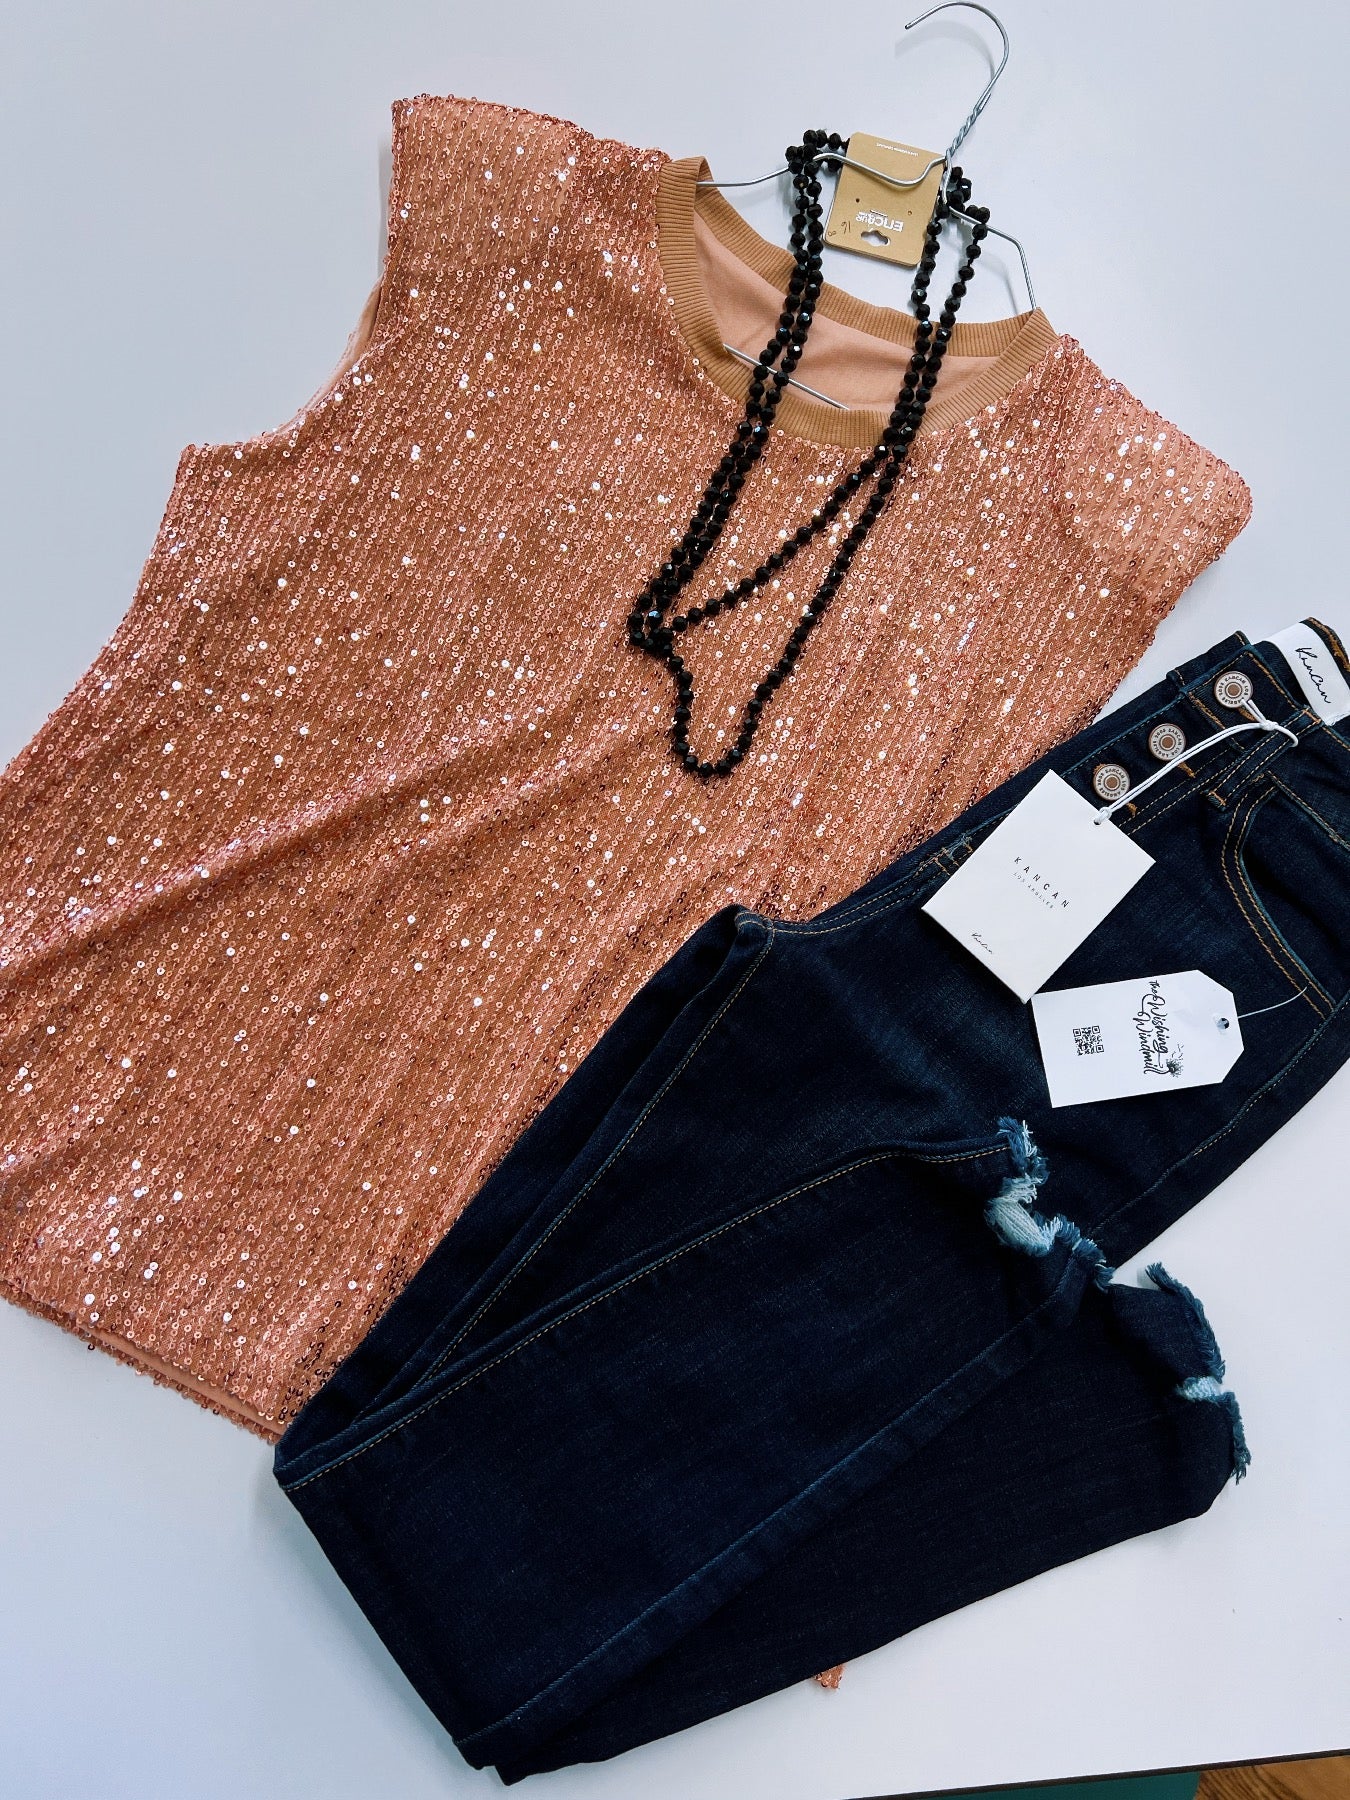 “Ladies Night Out” Sleeveless Sequin Top